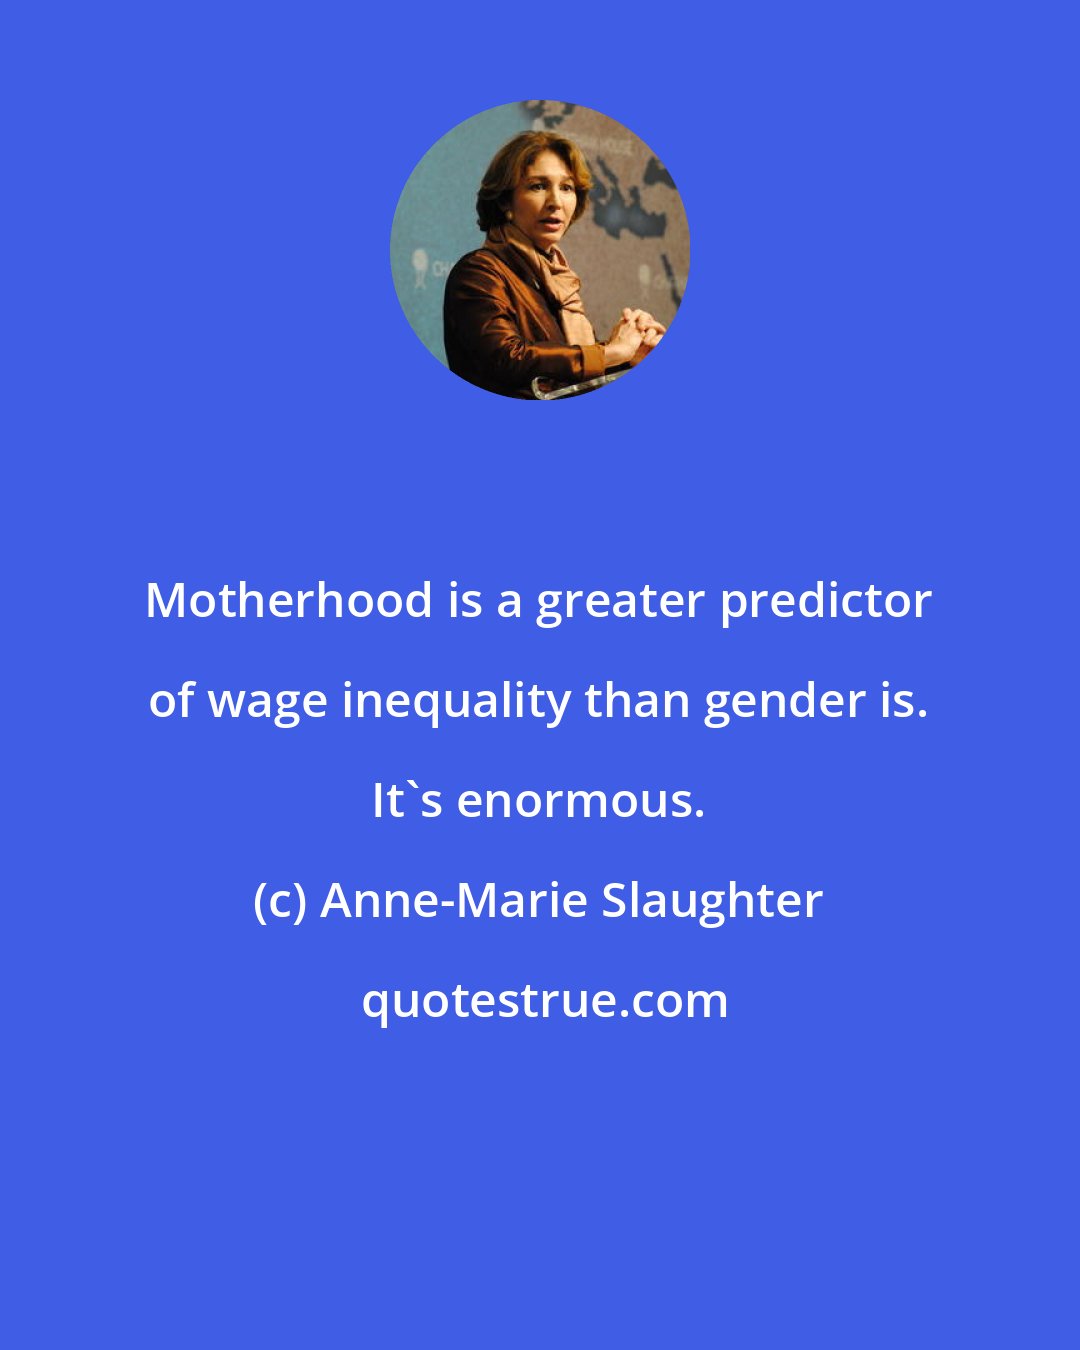 Anne-Marie Slaughter: Motherhood is a greater predictor of wage inequality than gender is. It's enormous.